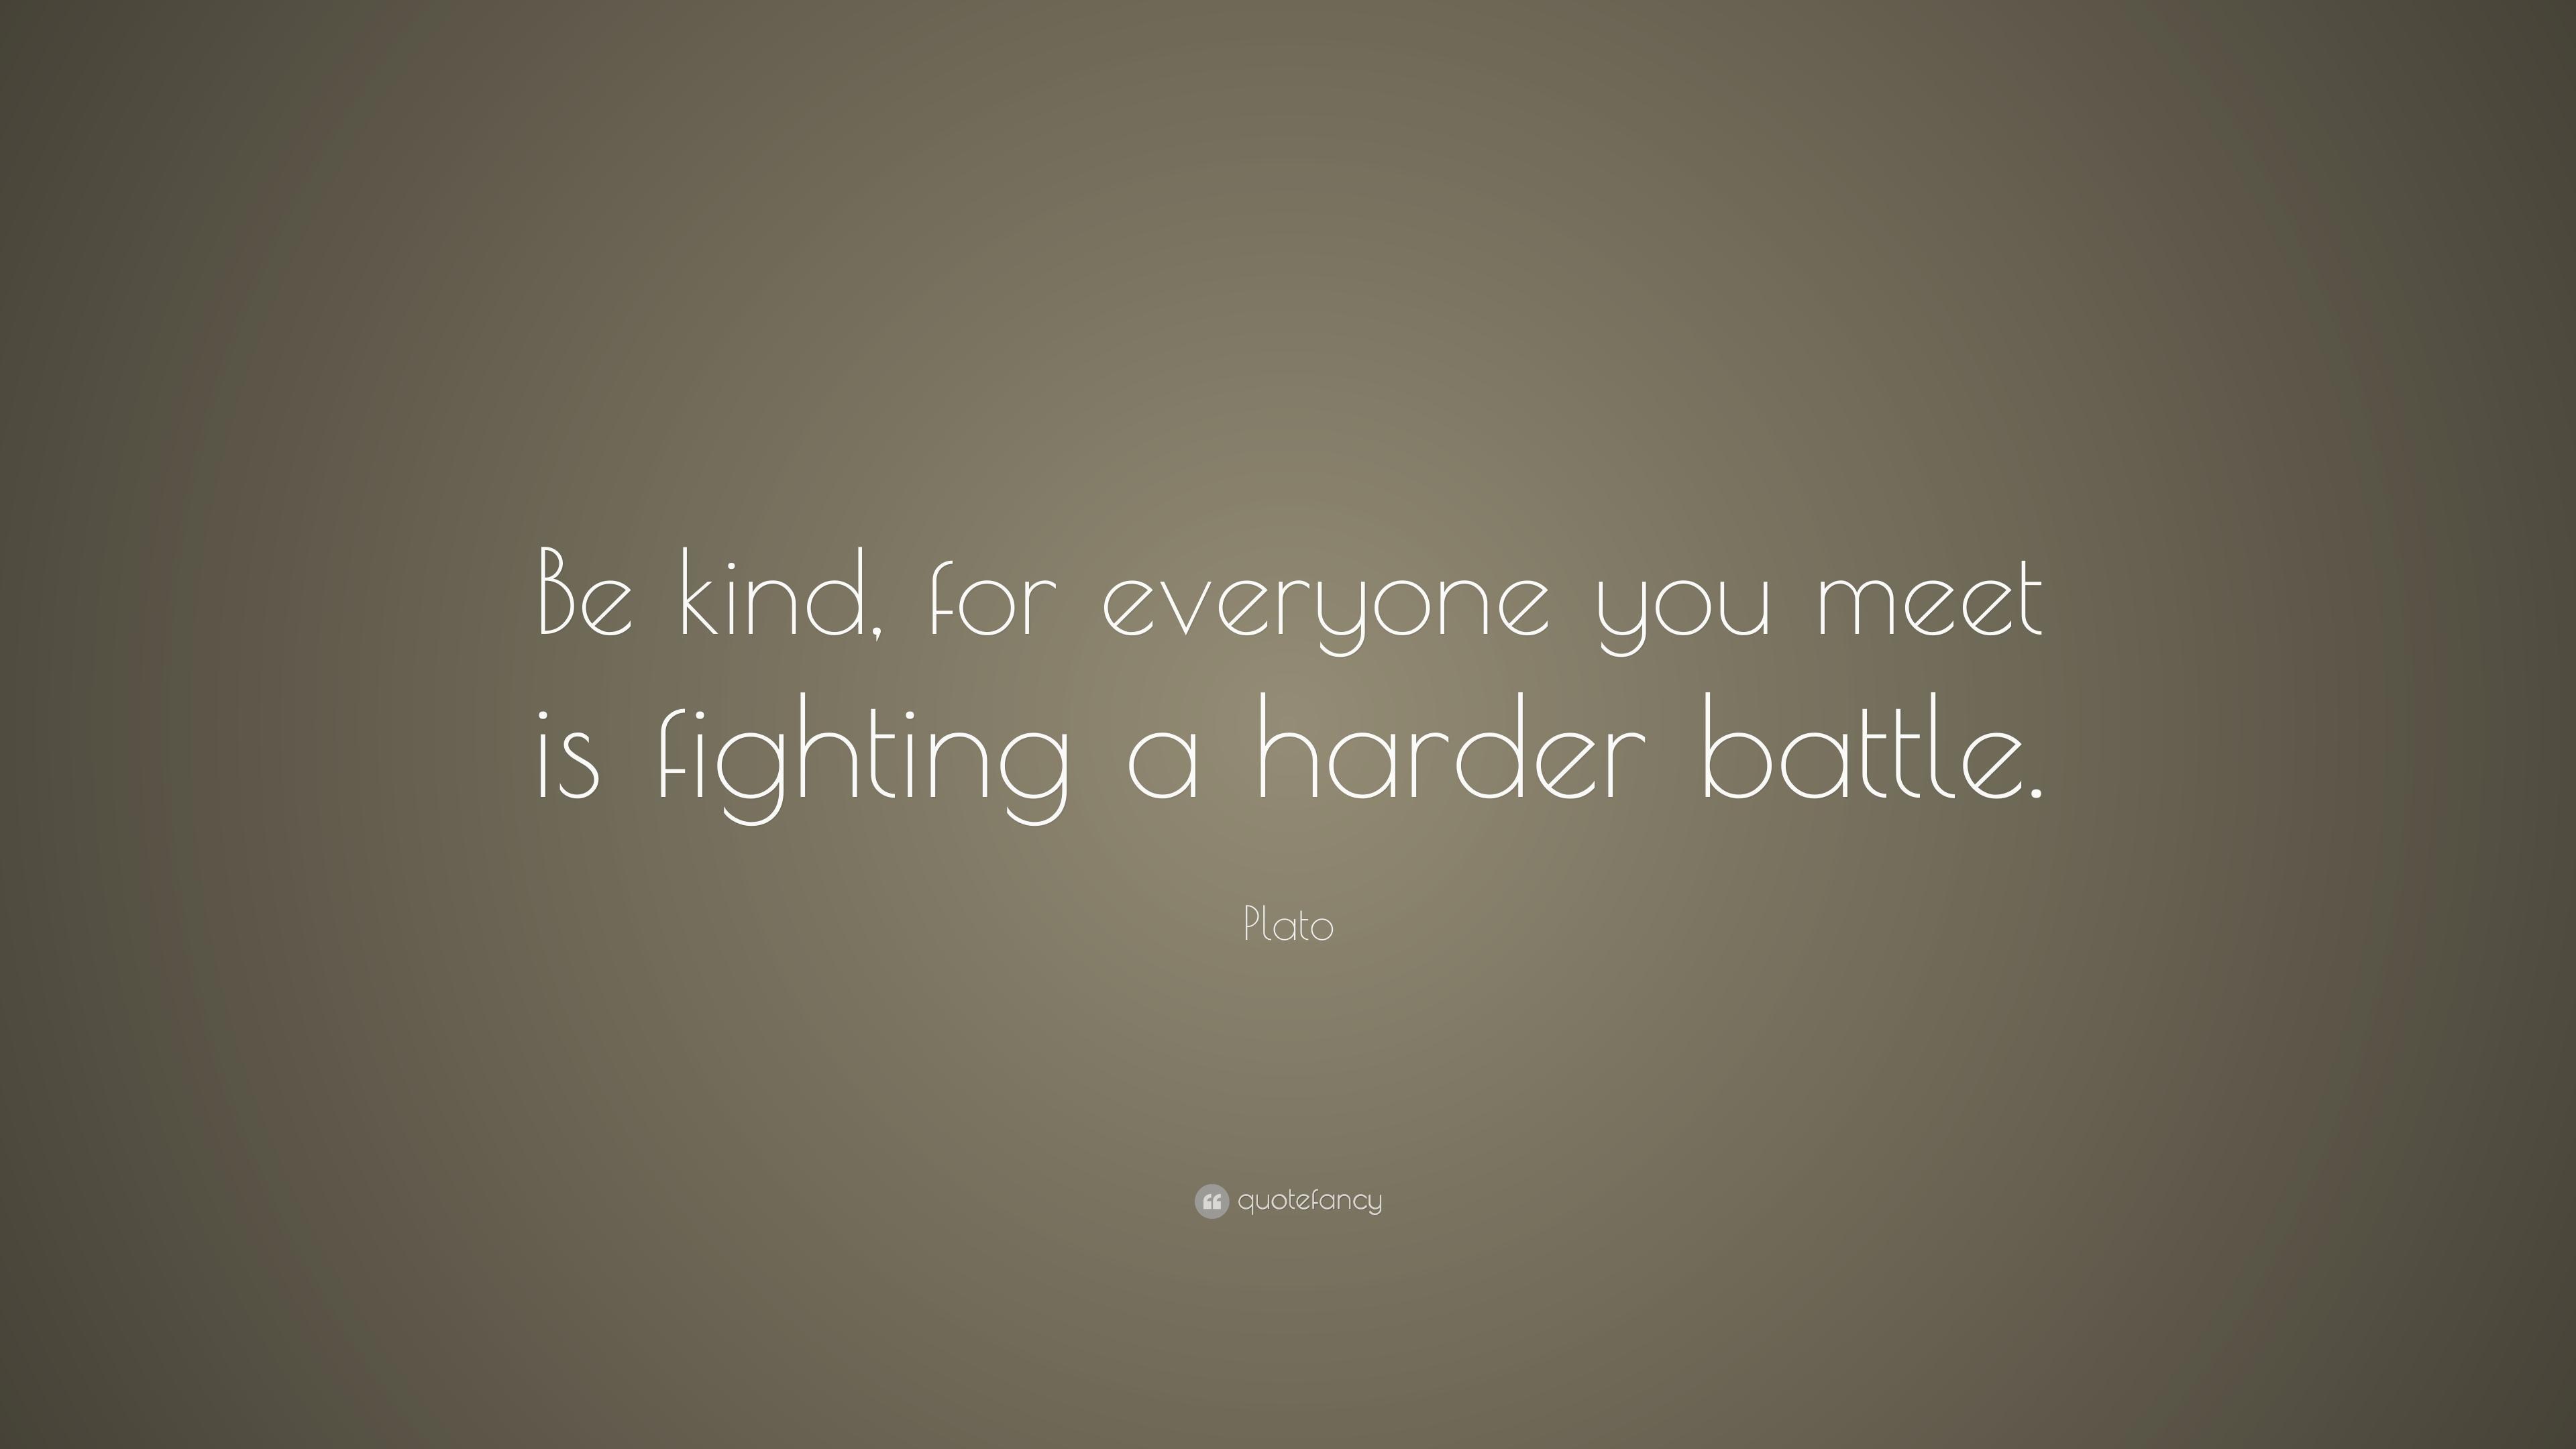 Plato Quote: “Be kind, for everyone you meet is fighting a